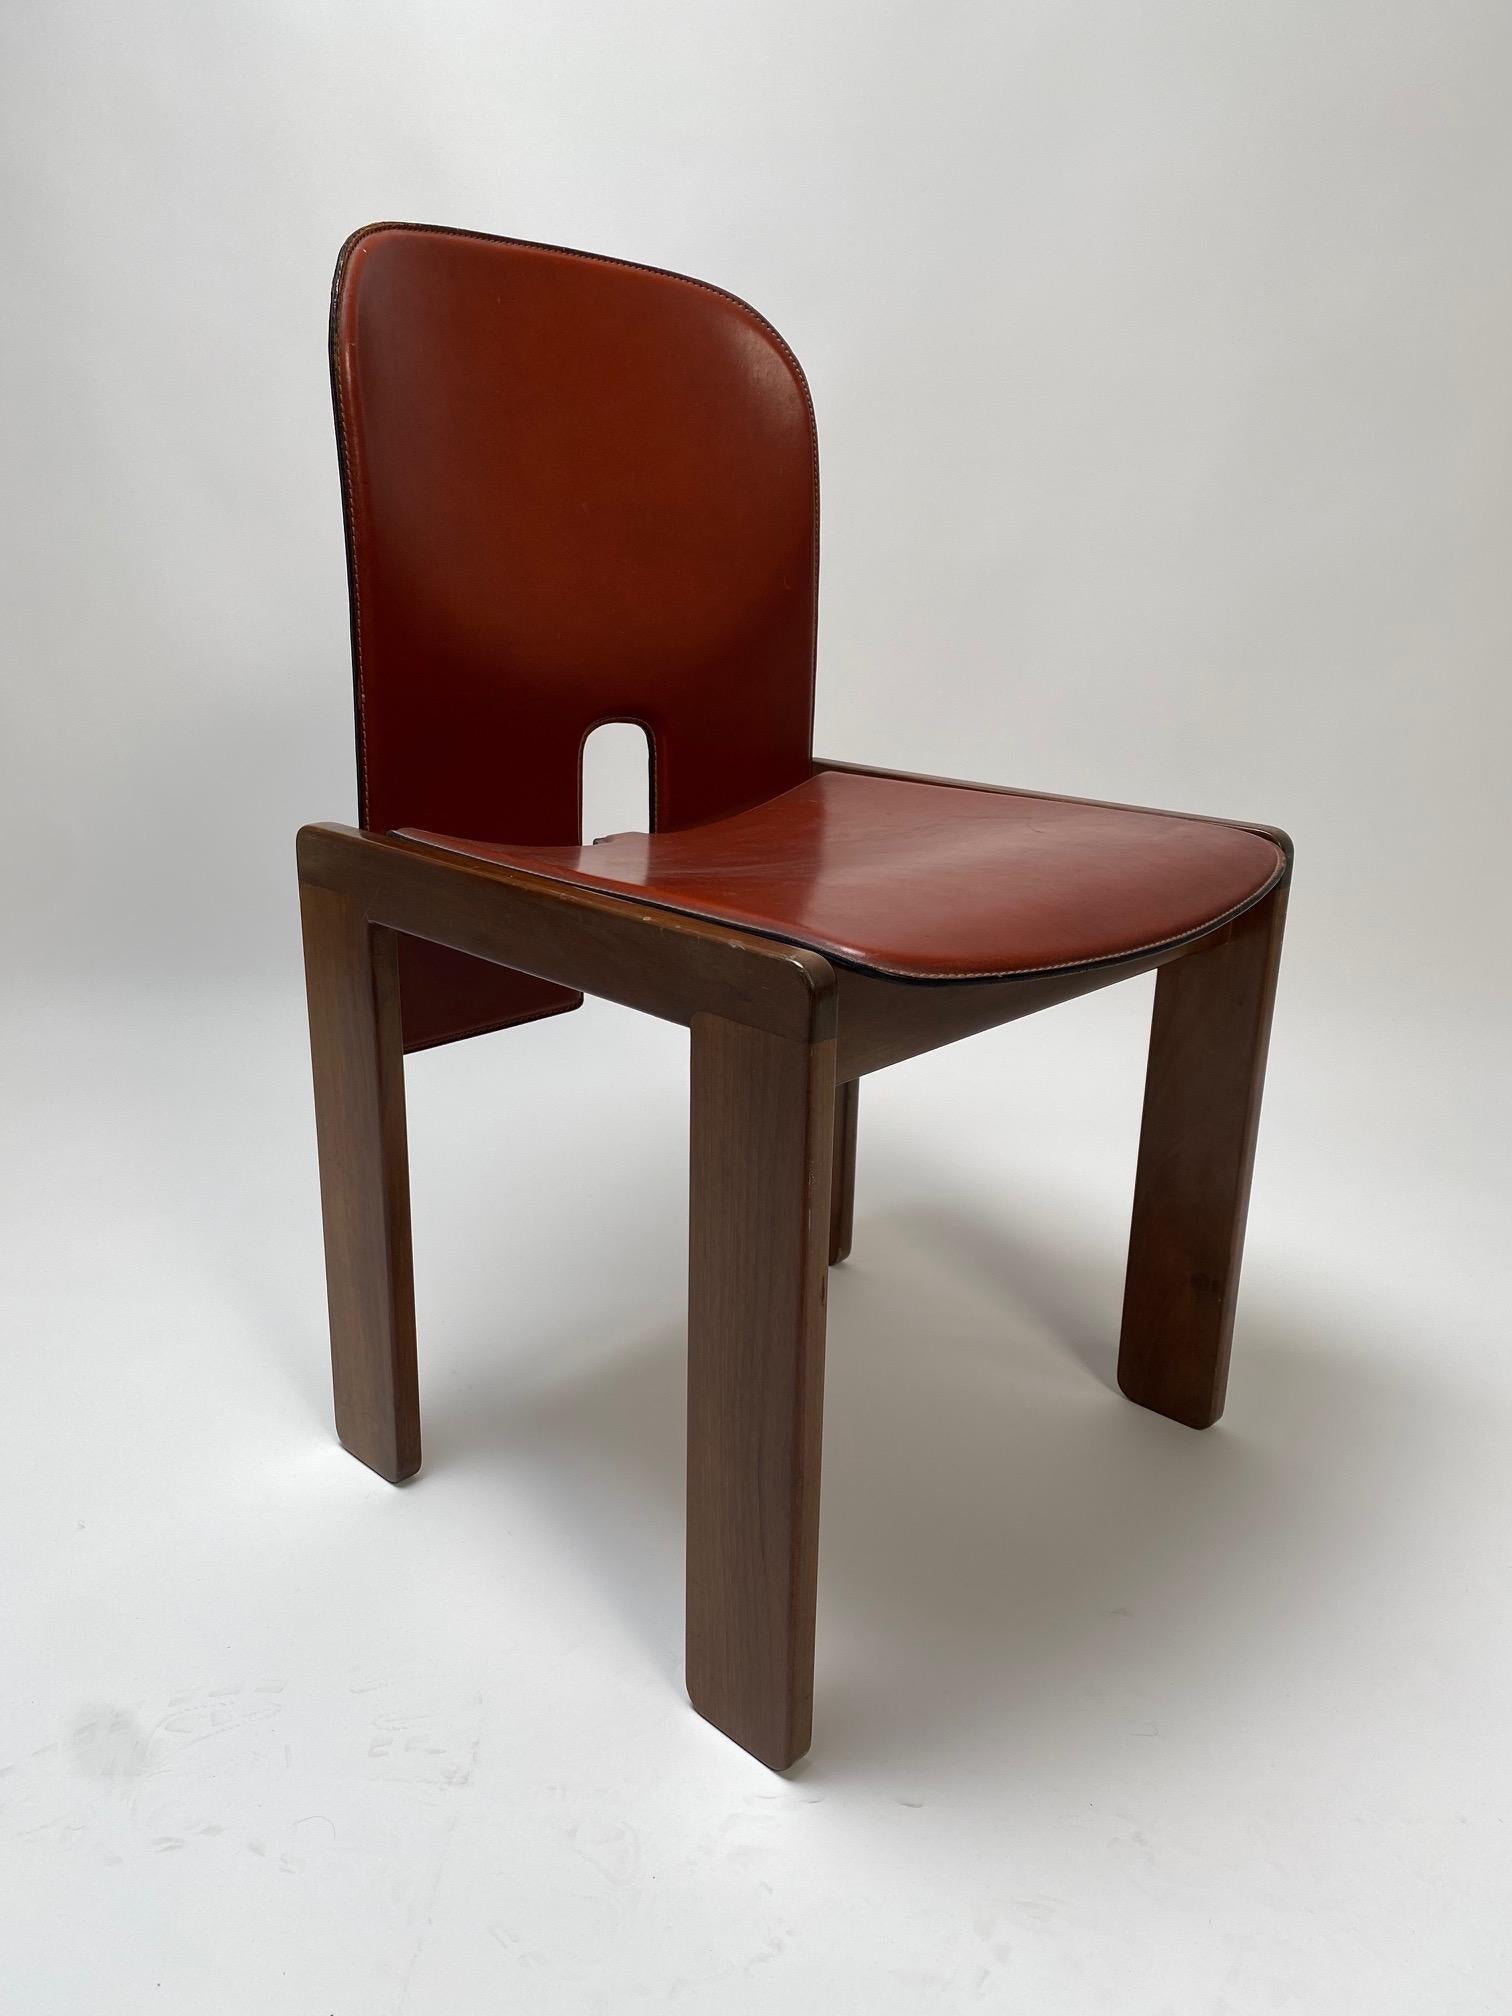 Afra and Tobia Scarpa, set of 2 leather and wood chairs made for Cassina, Italy, 1967.

It is one of the icons of Italian design, a perfect piece of furniture to be used as dining chairs but also for study or office.
The chairs are perfectly